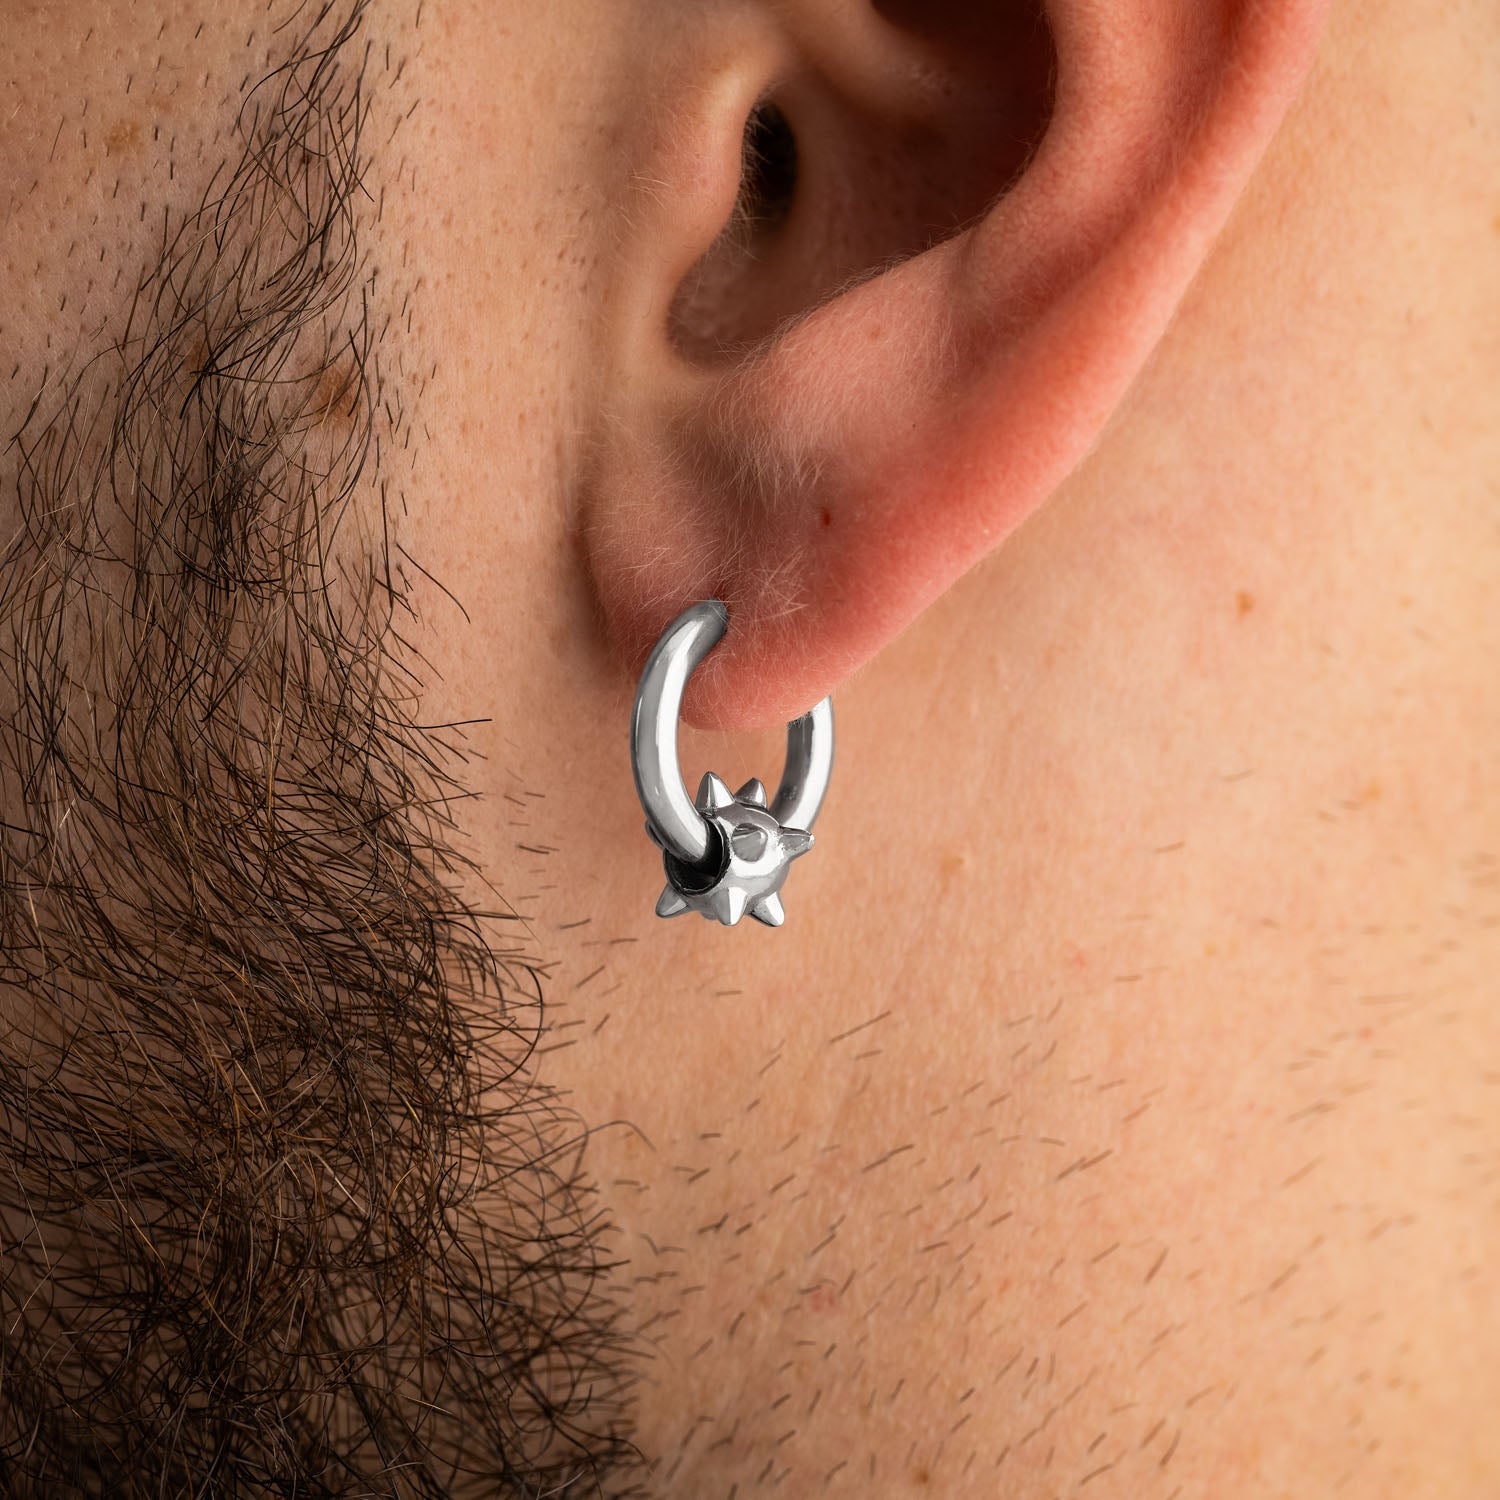 silver hoop earrings with spiked ball mens ear